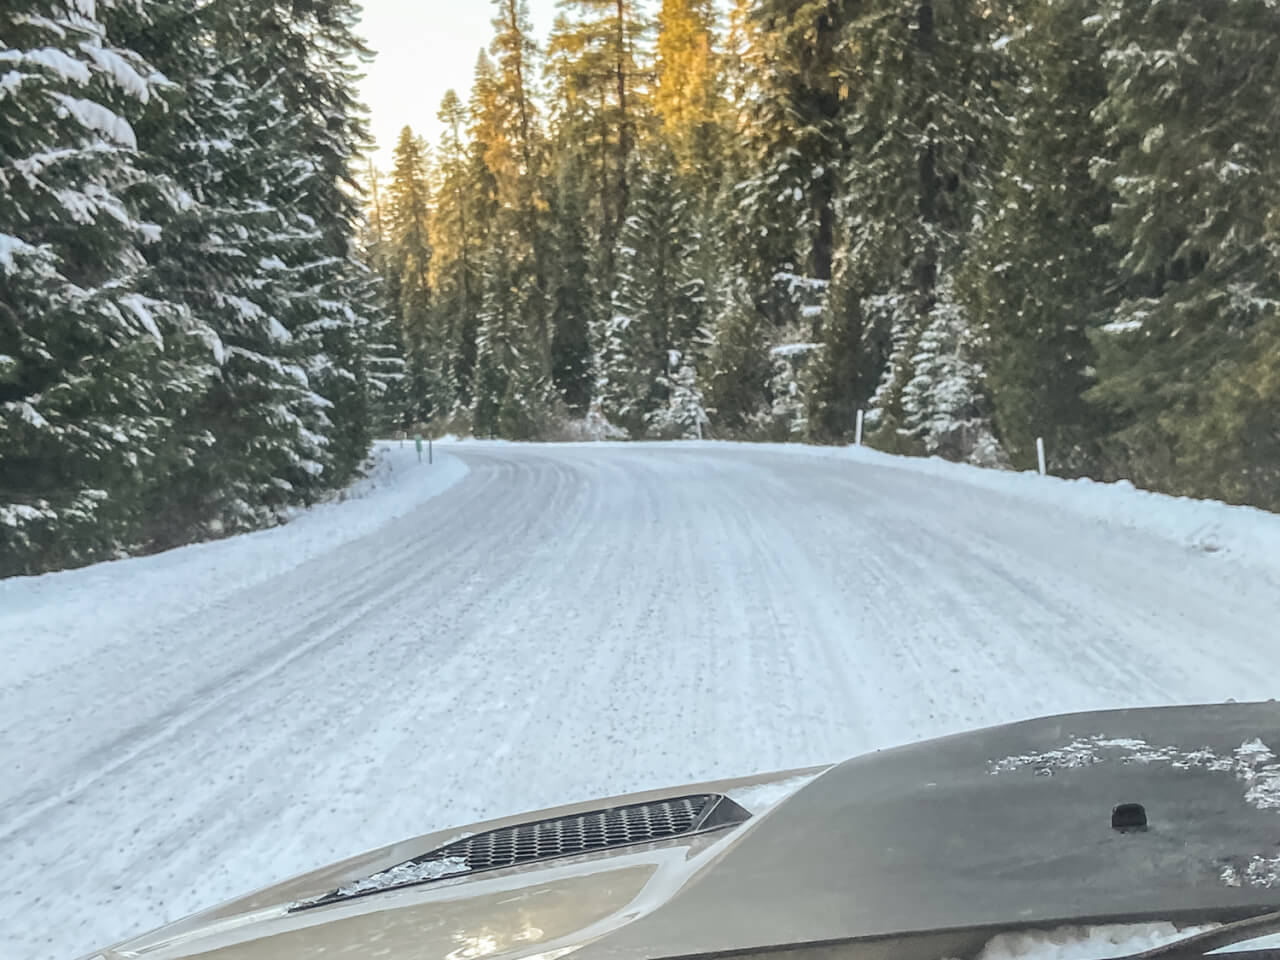 Note that snow wheeling is entirely different than driving on icy roads. On icy roads, you want a narrow tire with a lot of siping and even studs for traction. In contrast, deep snow is best conquered with wide tires that have flexible sidewalls and tread that is open, but not too aggressive.